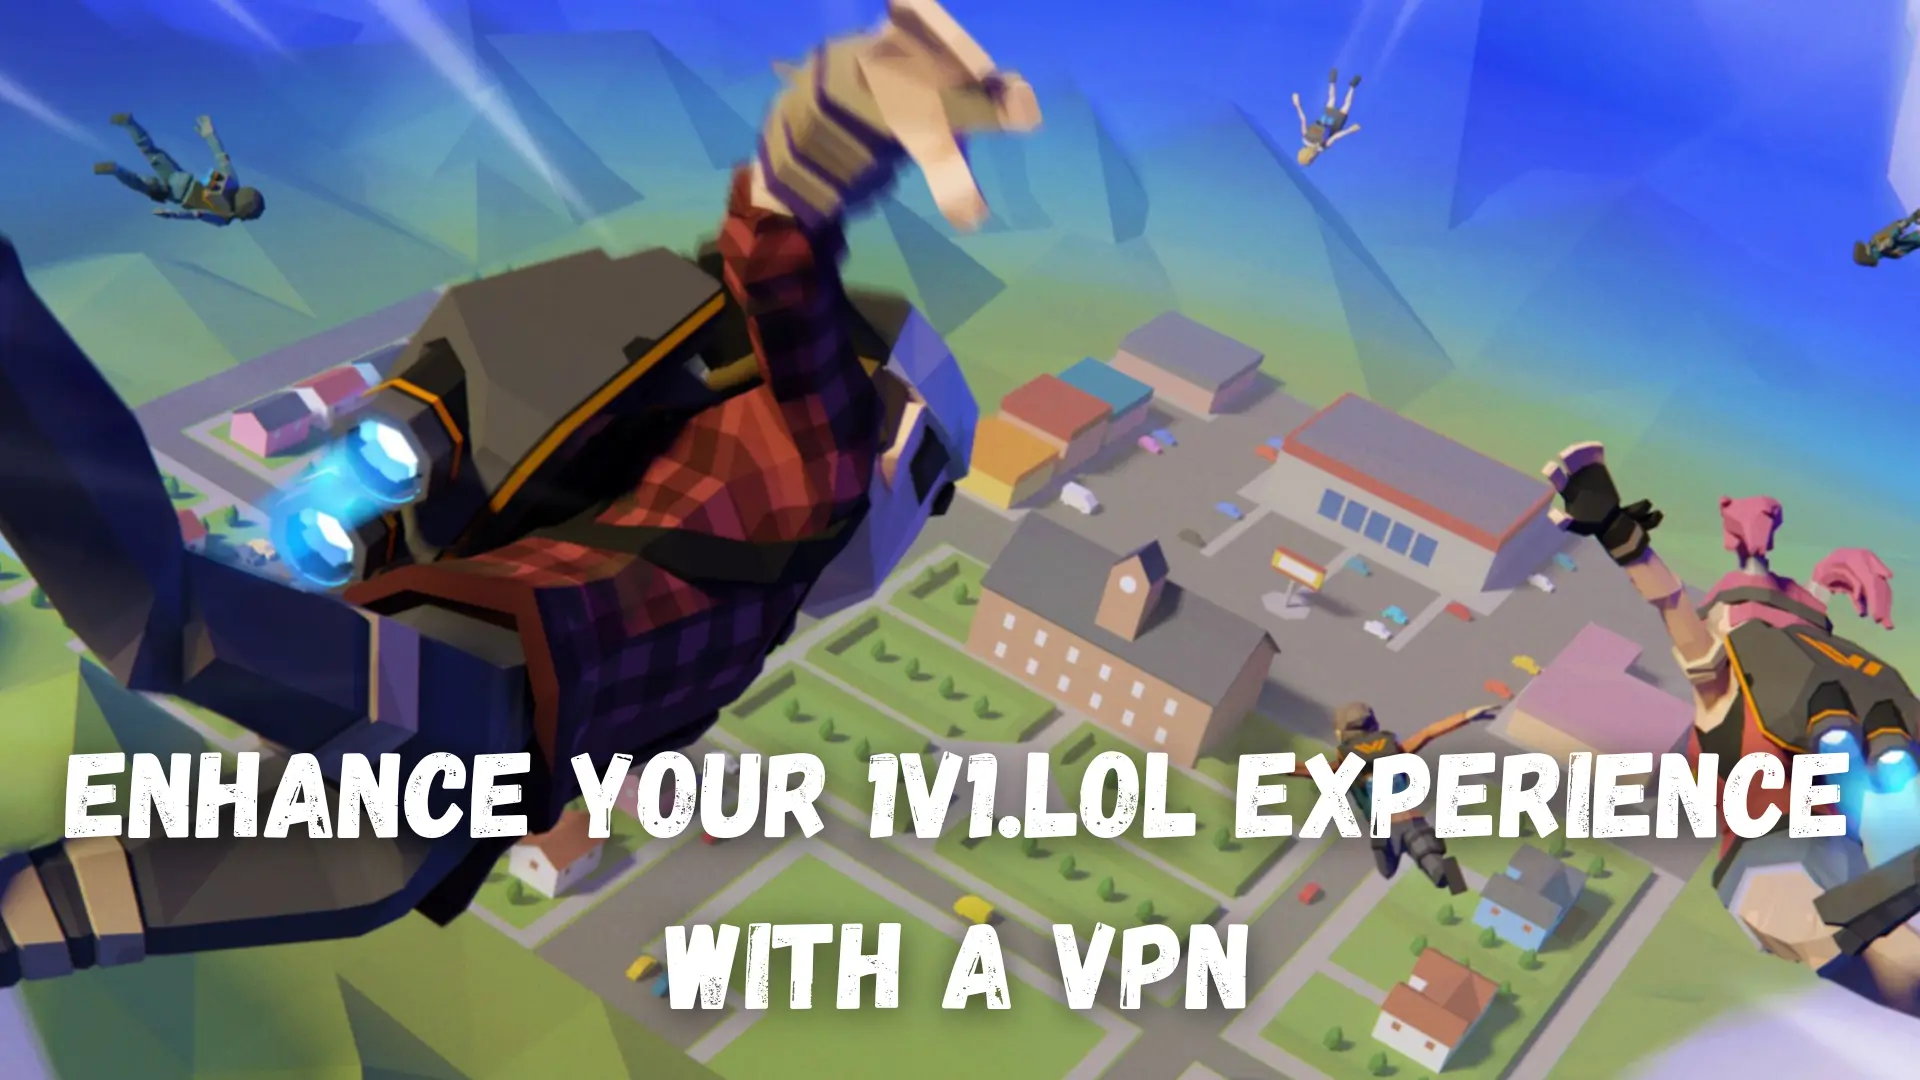 1v1.lol VPN – Best Picks and How to Use Them